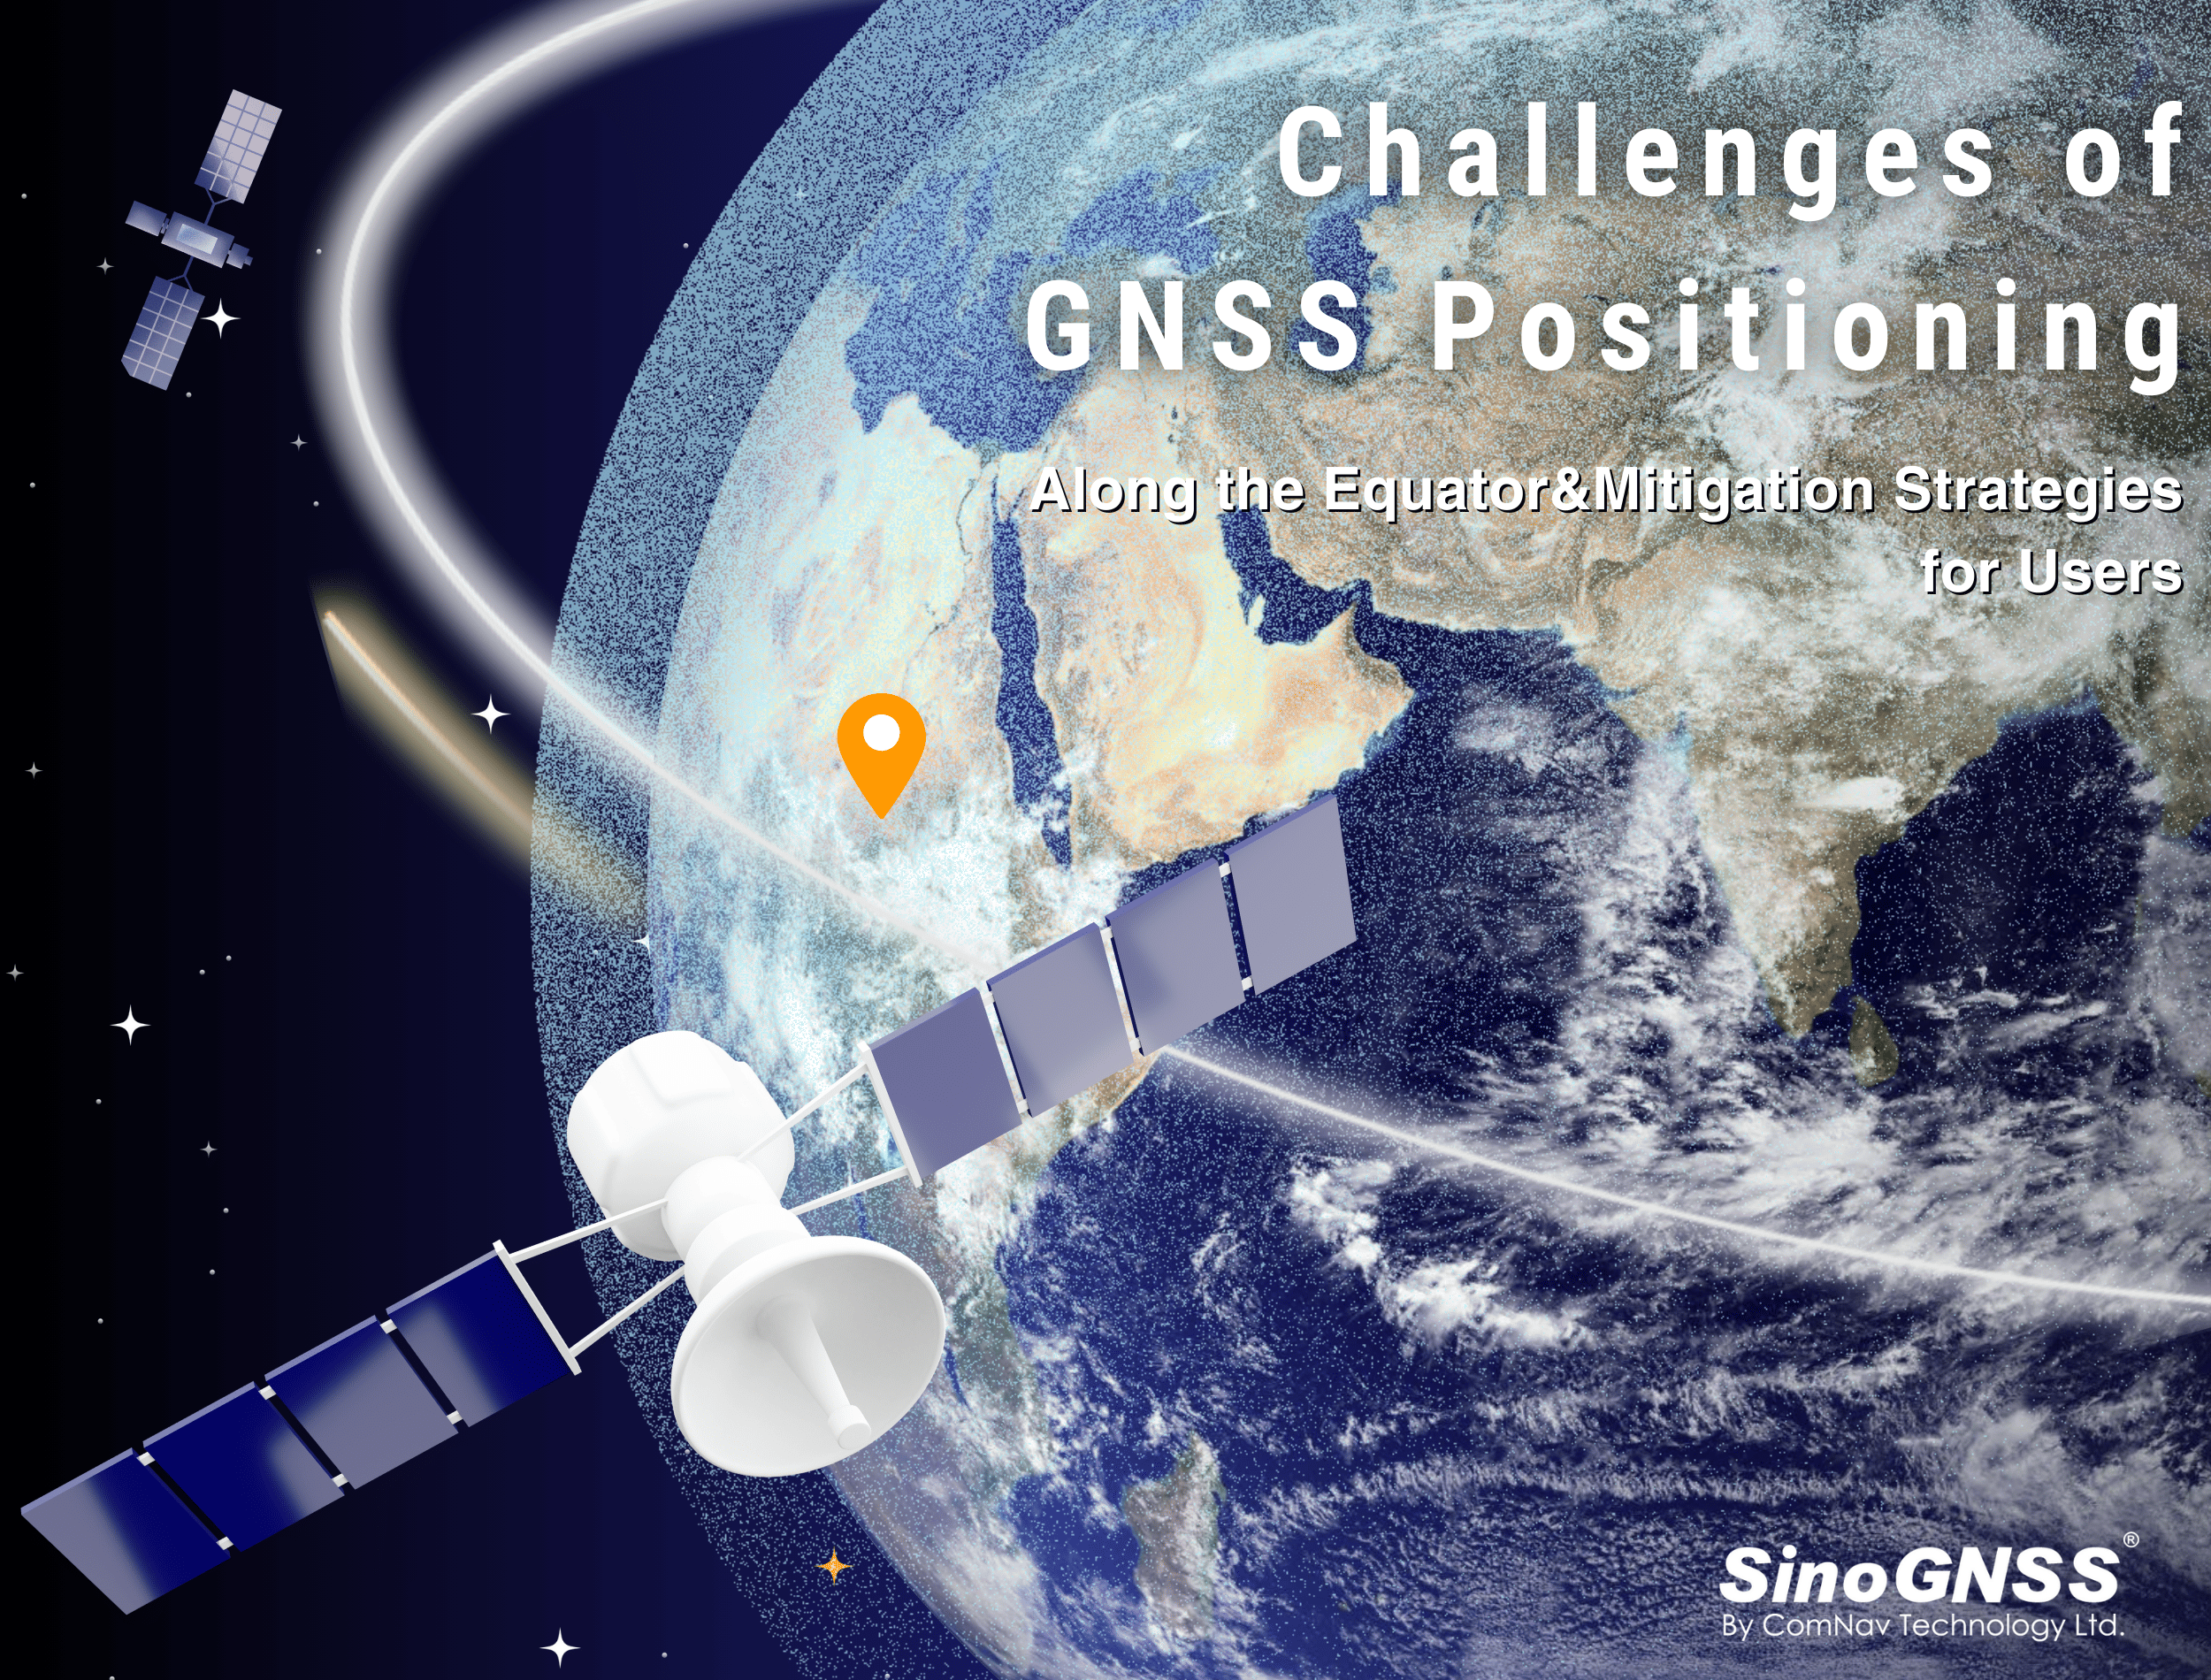 Challenges of GNSS Positioning Along the Equator and Mitigation Strategies for Users